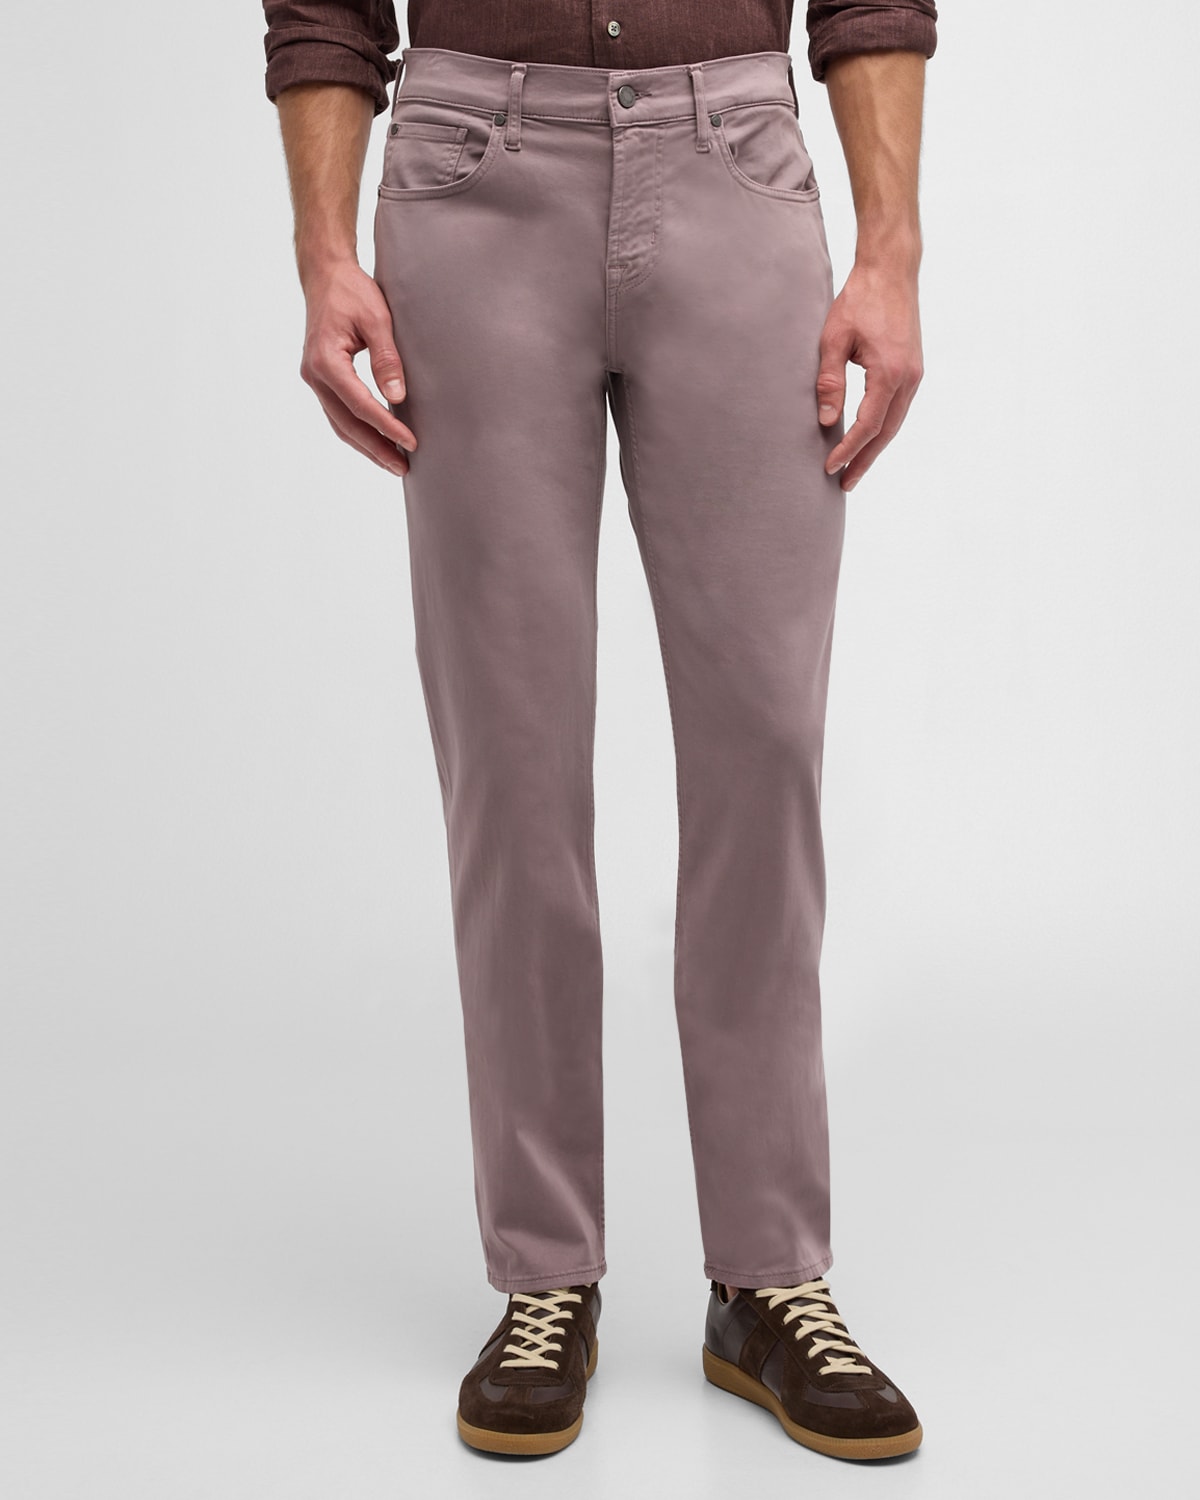 Shop 7 For All Mankind Men's Slimmy Luxe Performance Plus Pants In Mauve